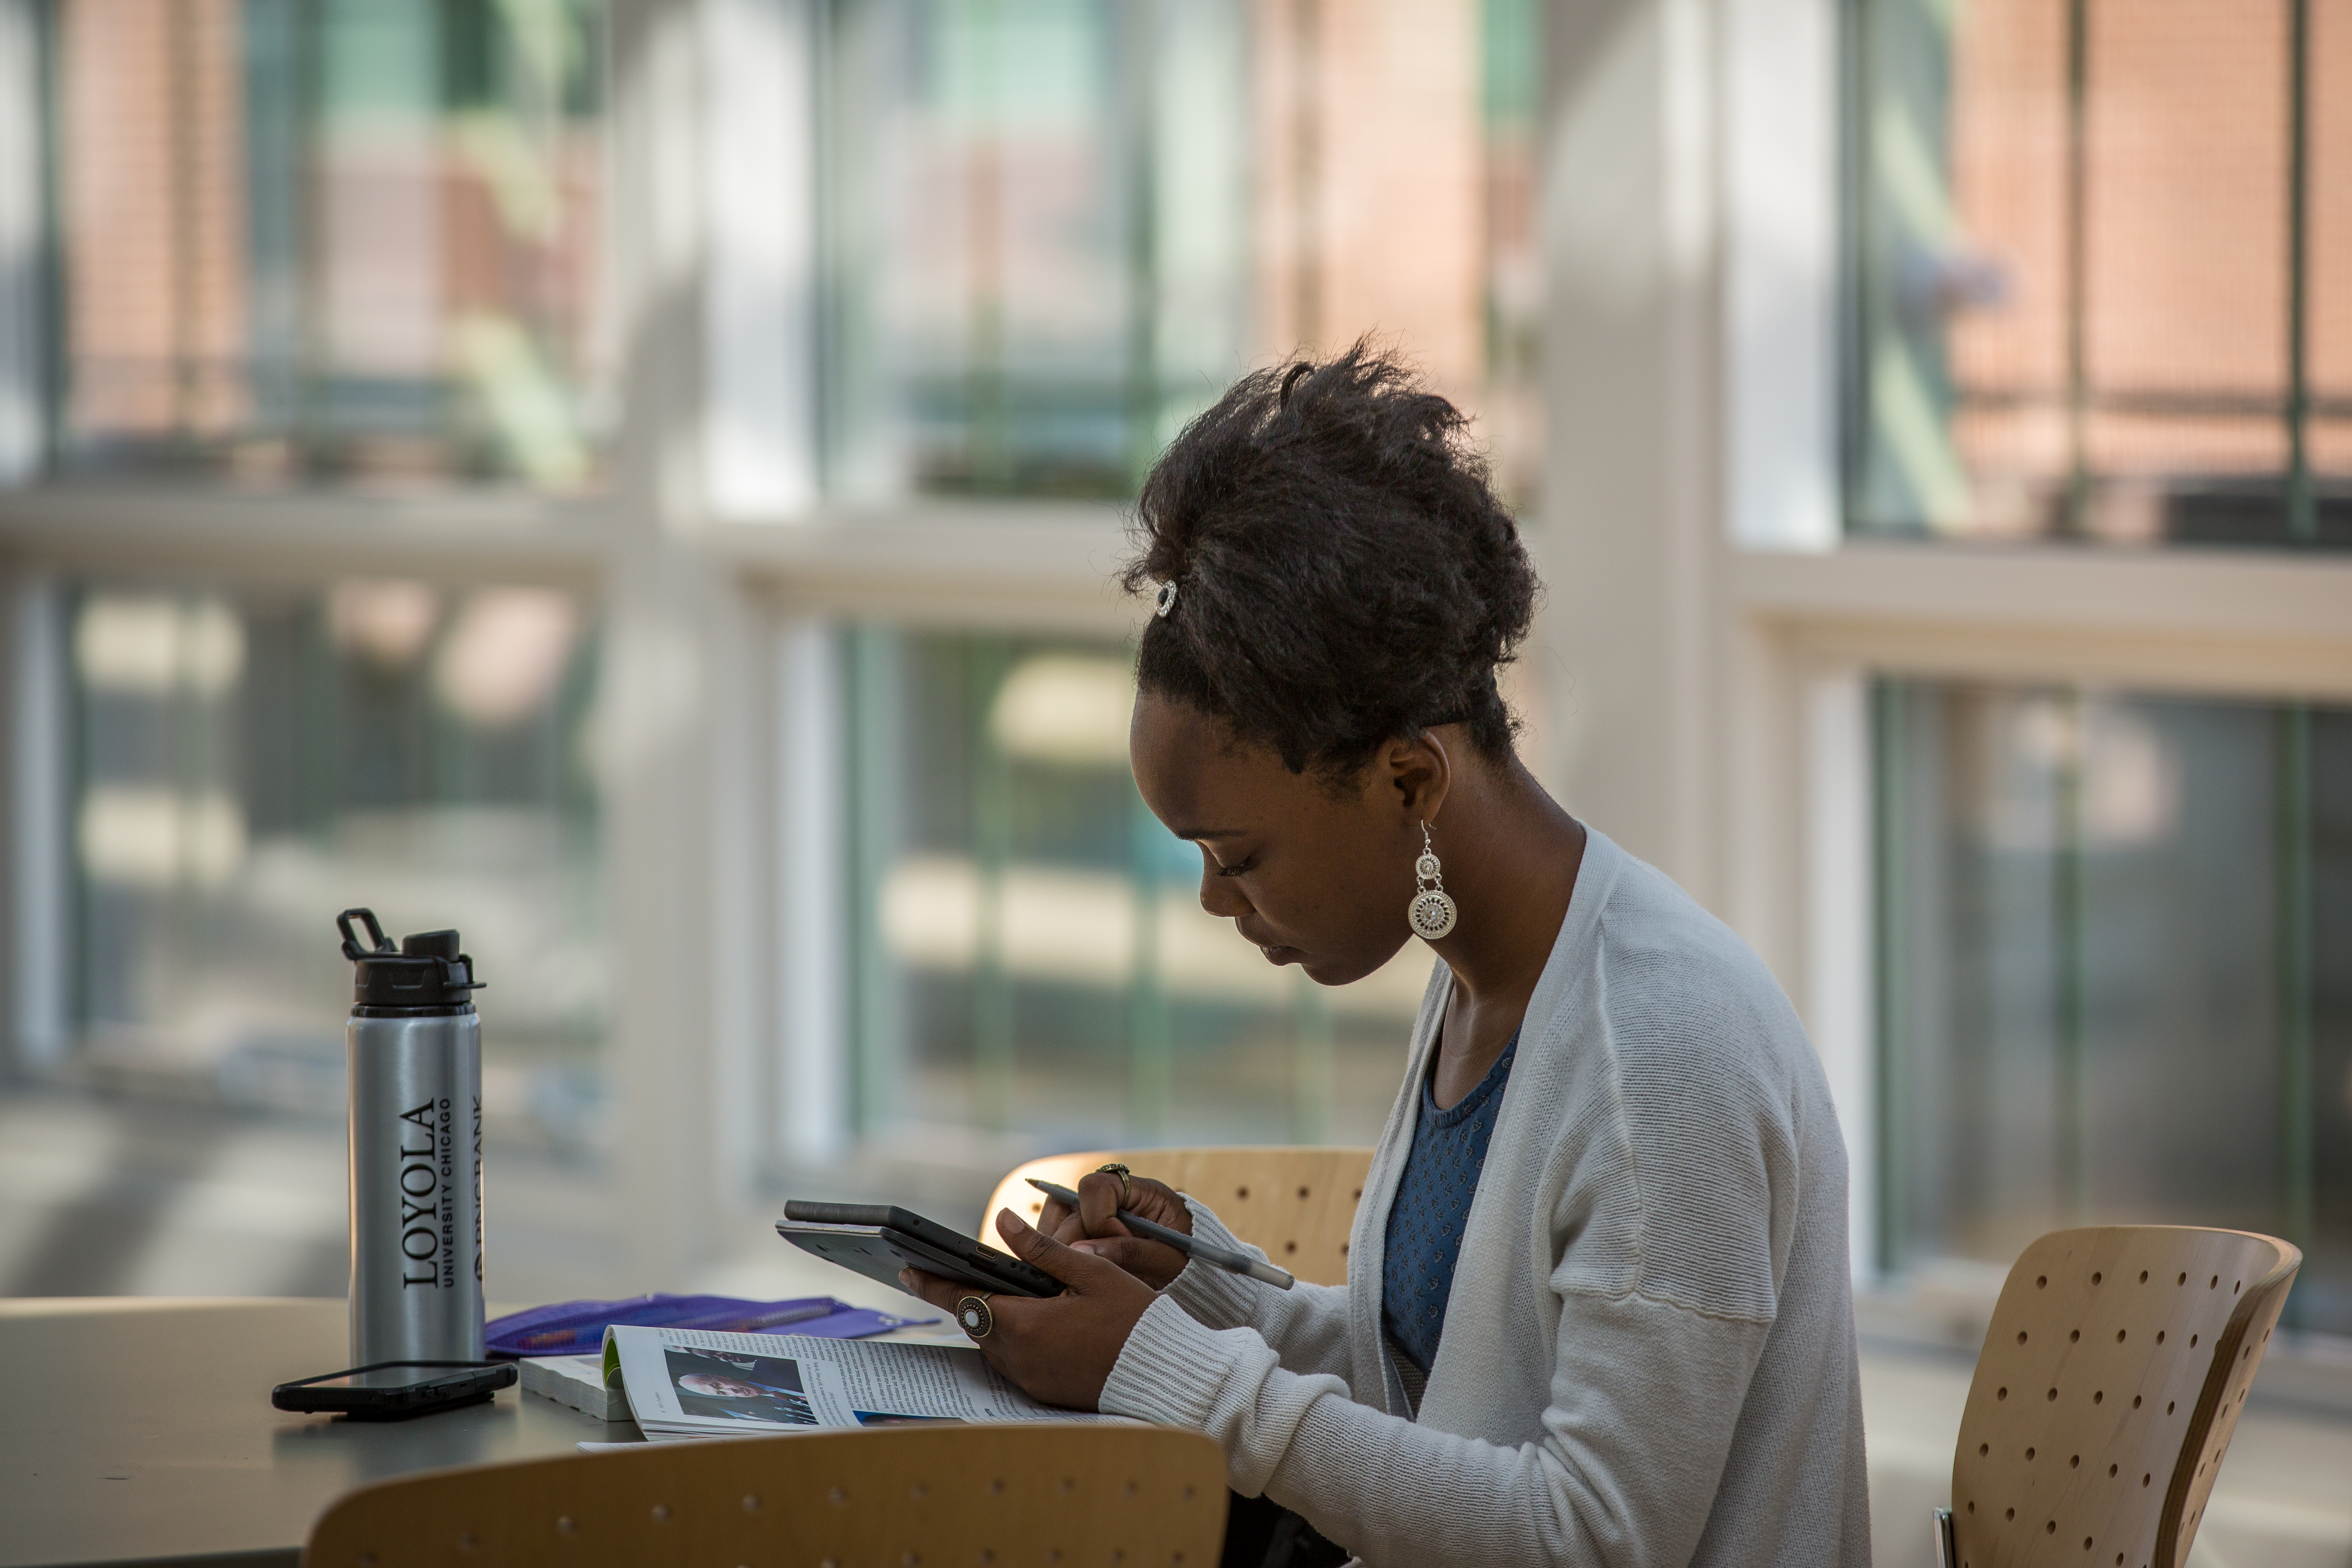 Photo shows student in front of windows looking at tablet with open book on table and Loyola water bottle.